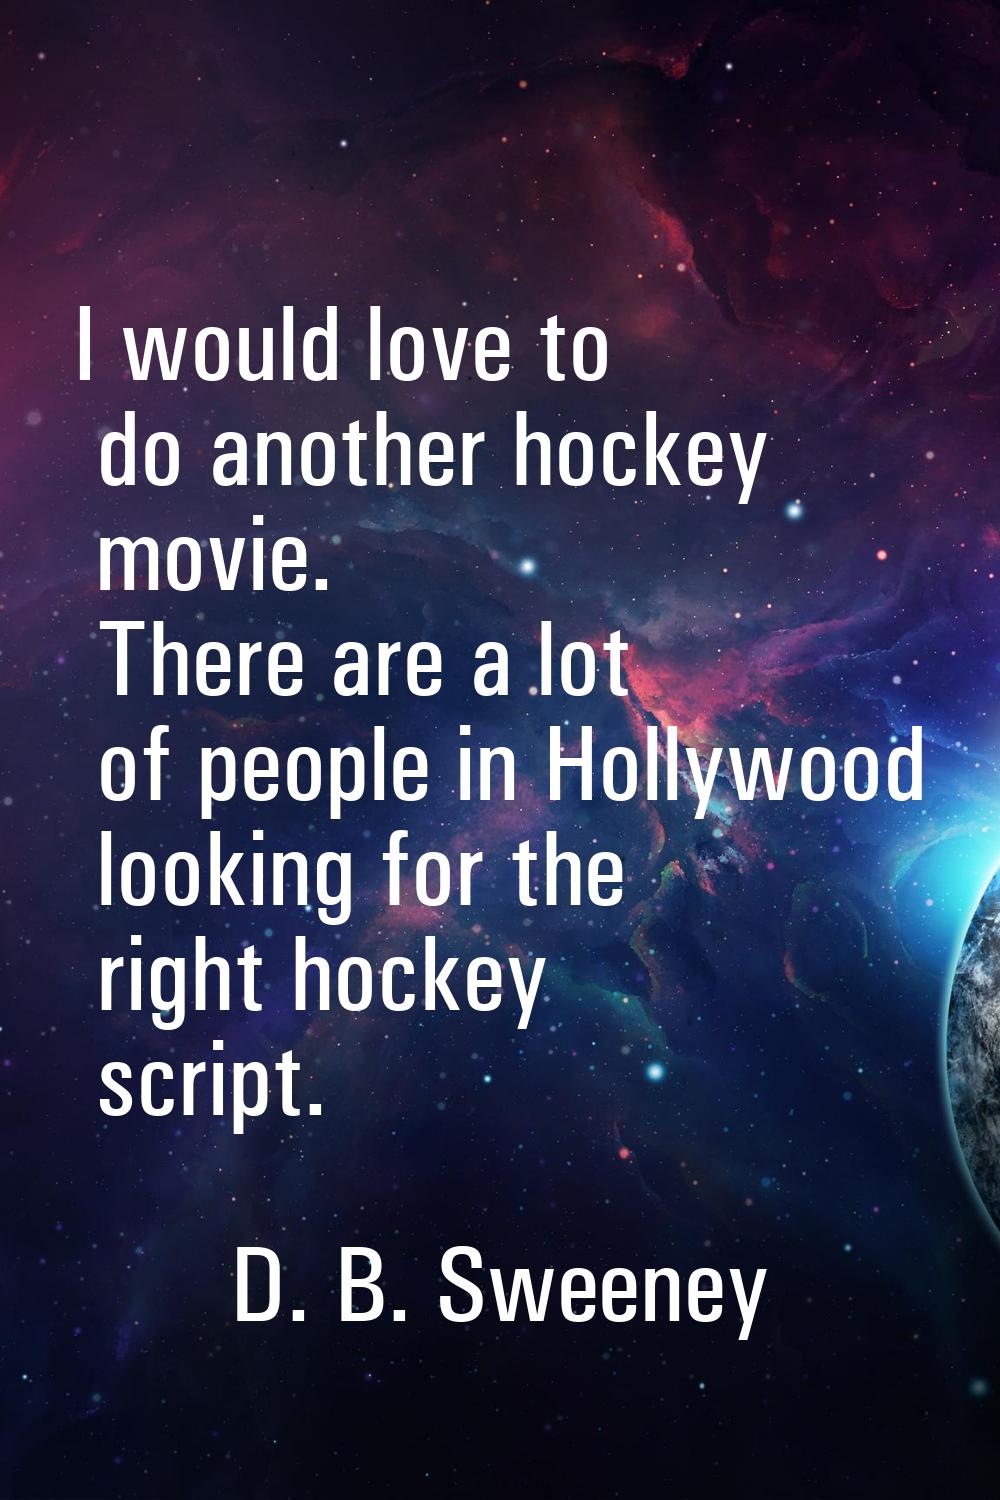 I would love to do another hockey movie. There are a lot of people in Hollywood looking for the rig